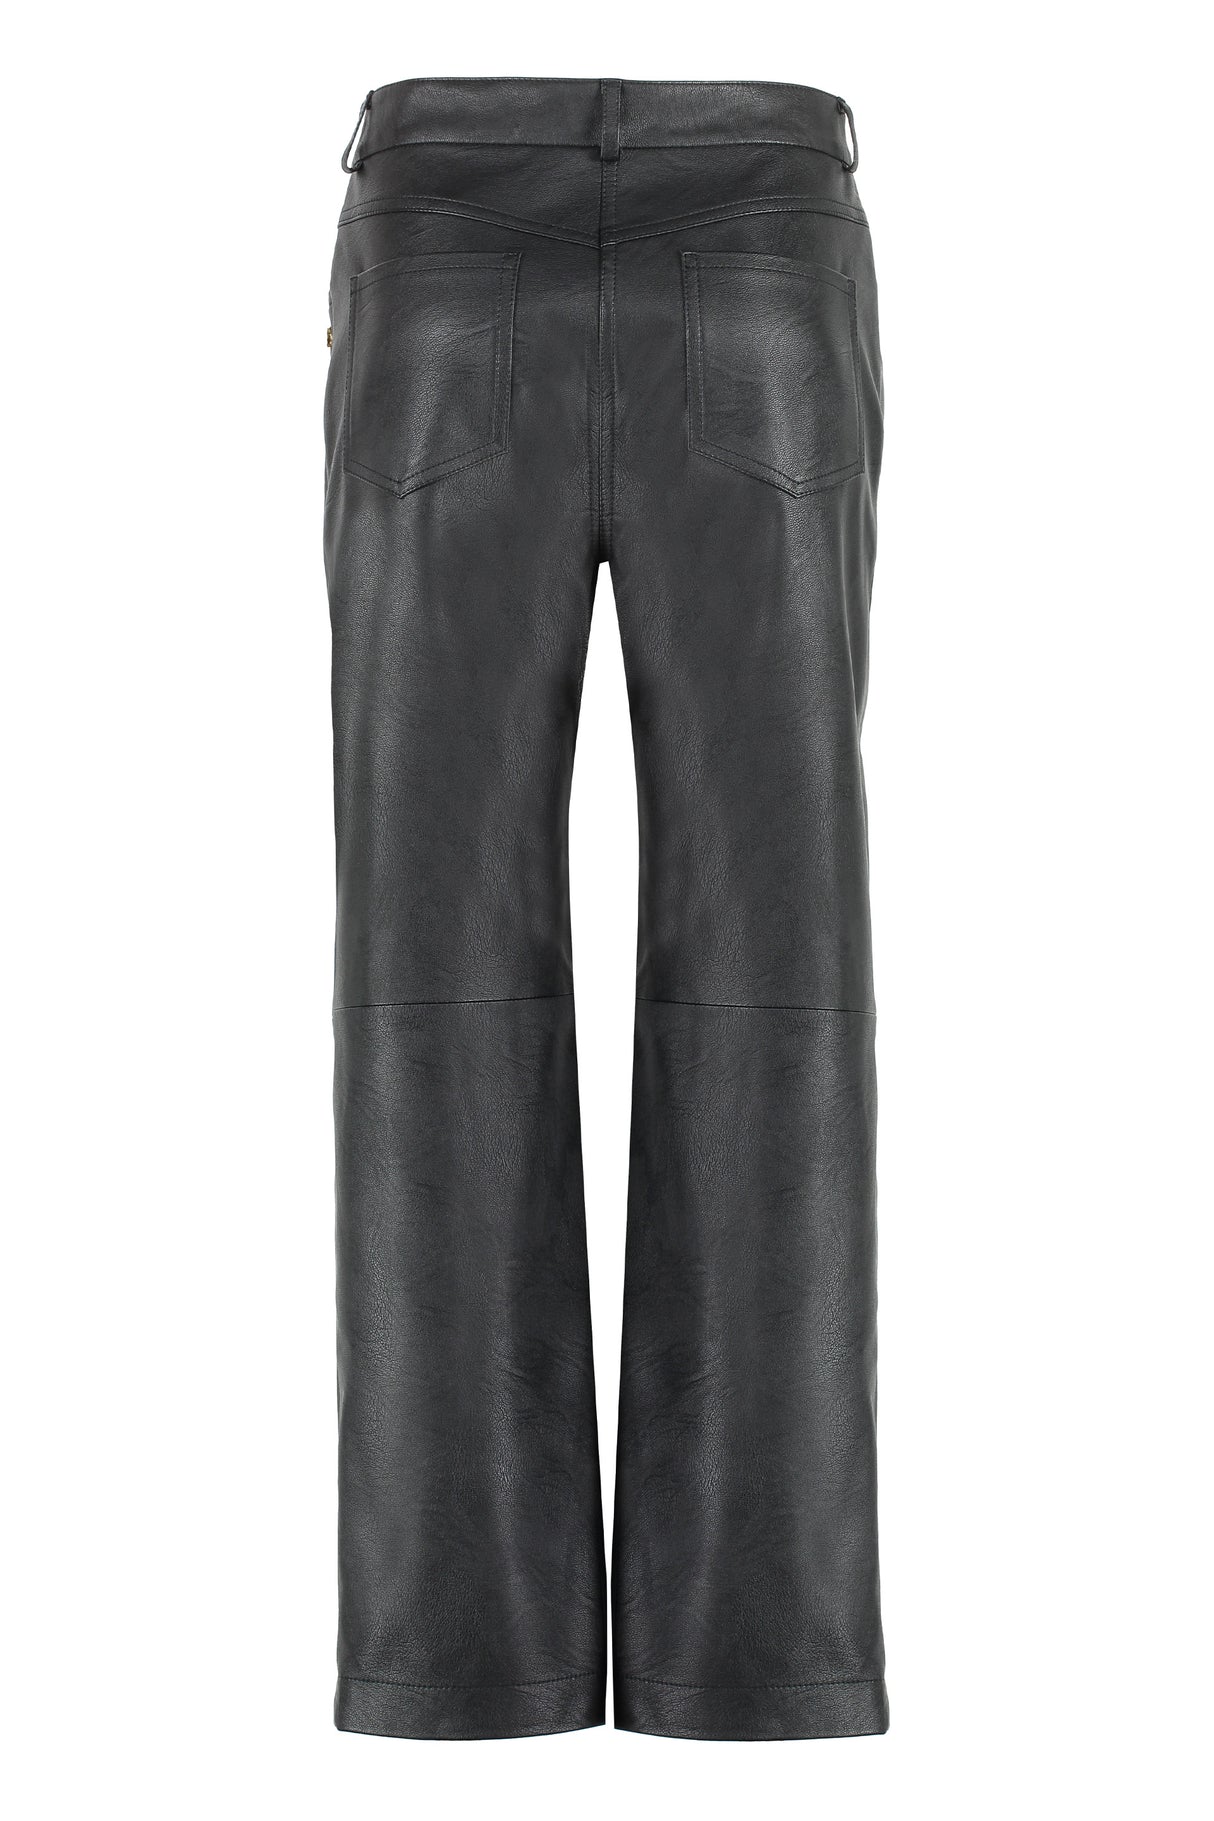 STELLA MCCARTNEY Black Alter Mat Faux Leather Trousers for Women